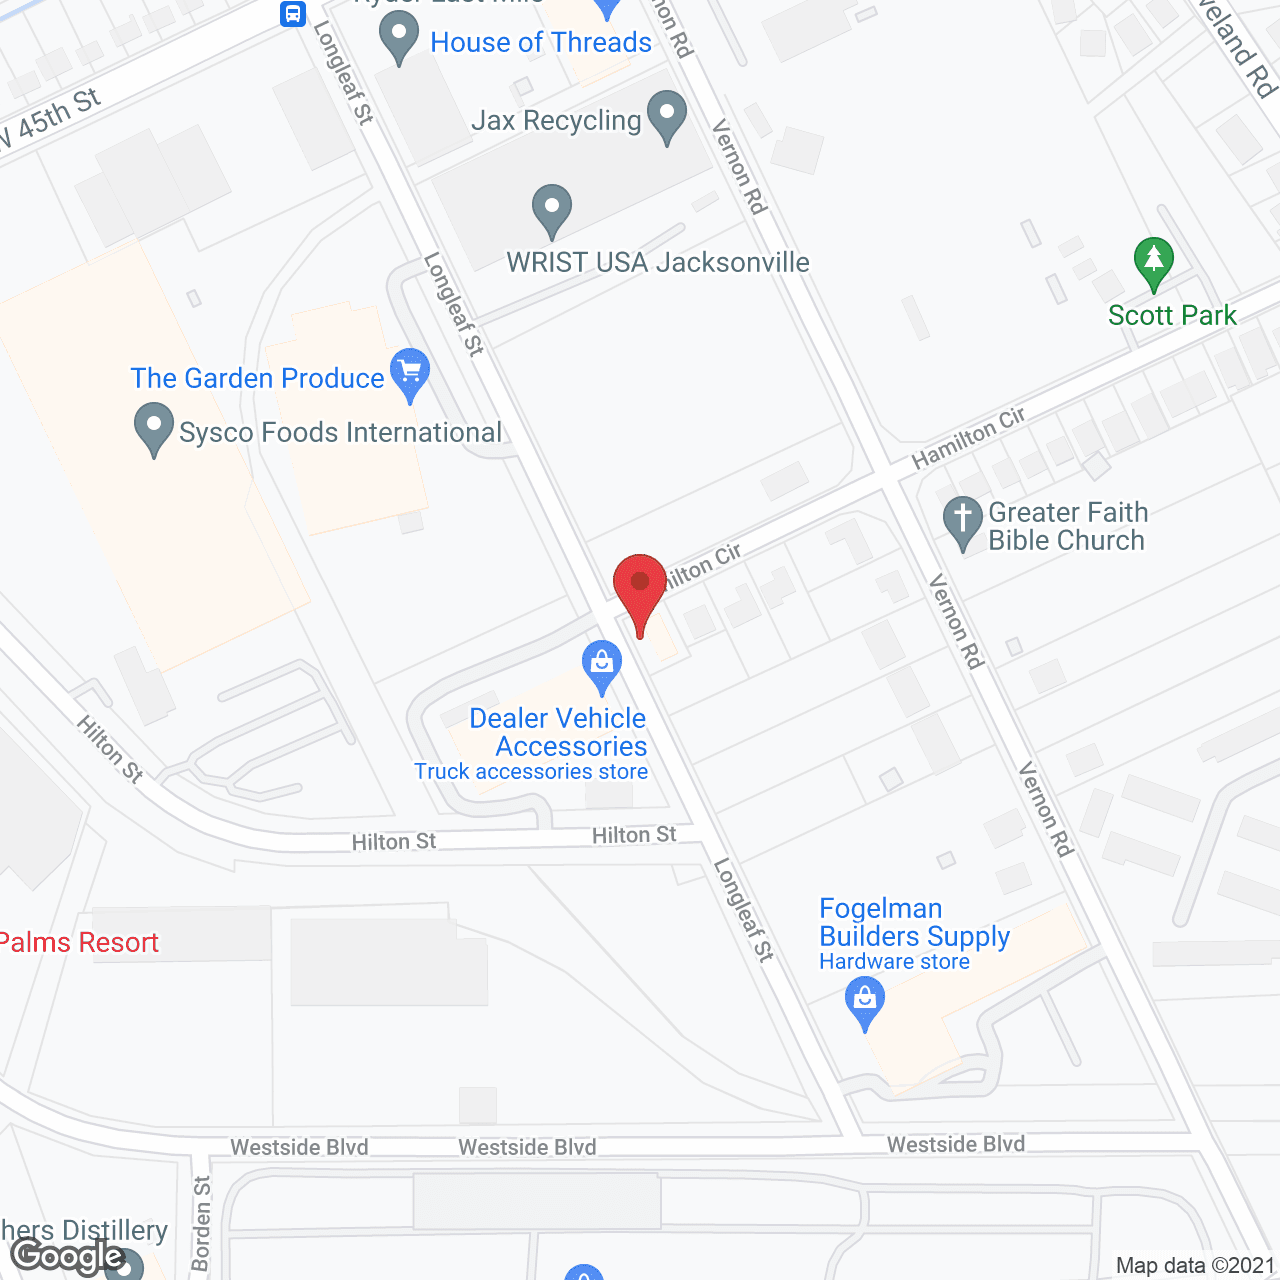 Bridge of Hope Assisted Living Facility in google map